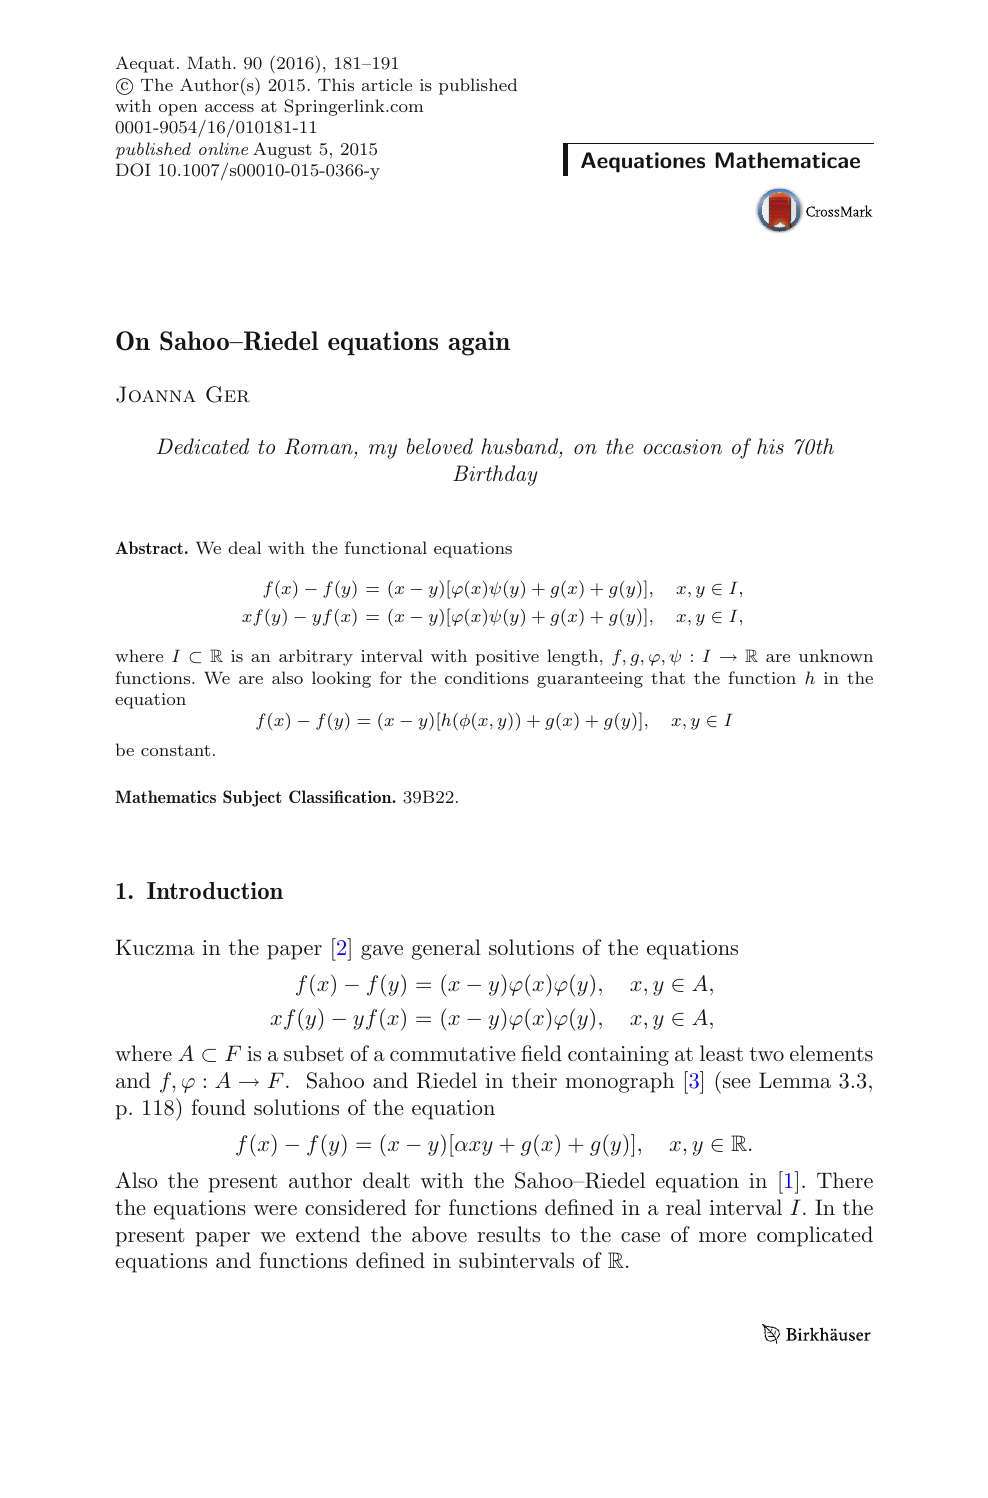 On Sahoo Riedel Equations Again Topic Of Research Paper In Mathematics Download Scholarly Article Pdf And Read For Free On Cyberleninka Open Science Hub